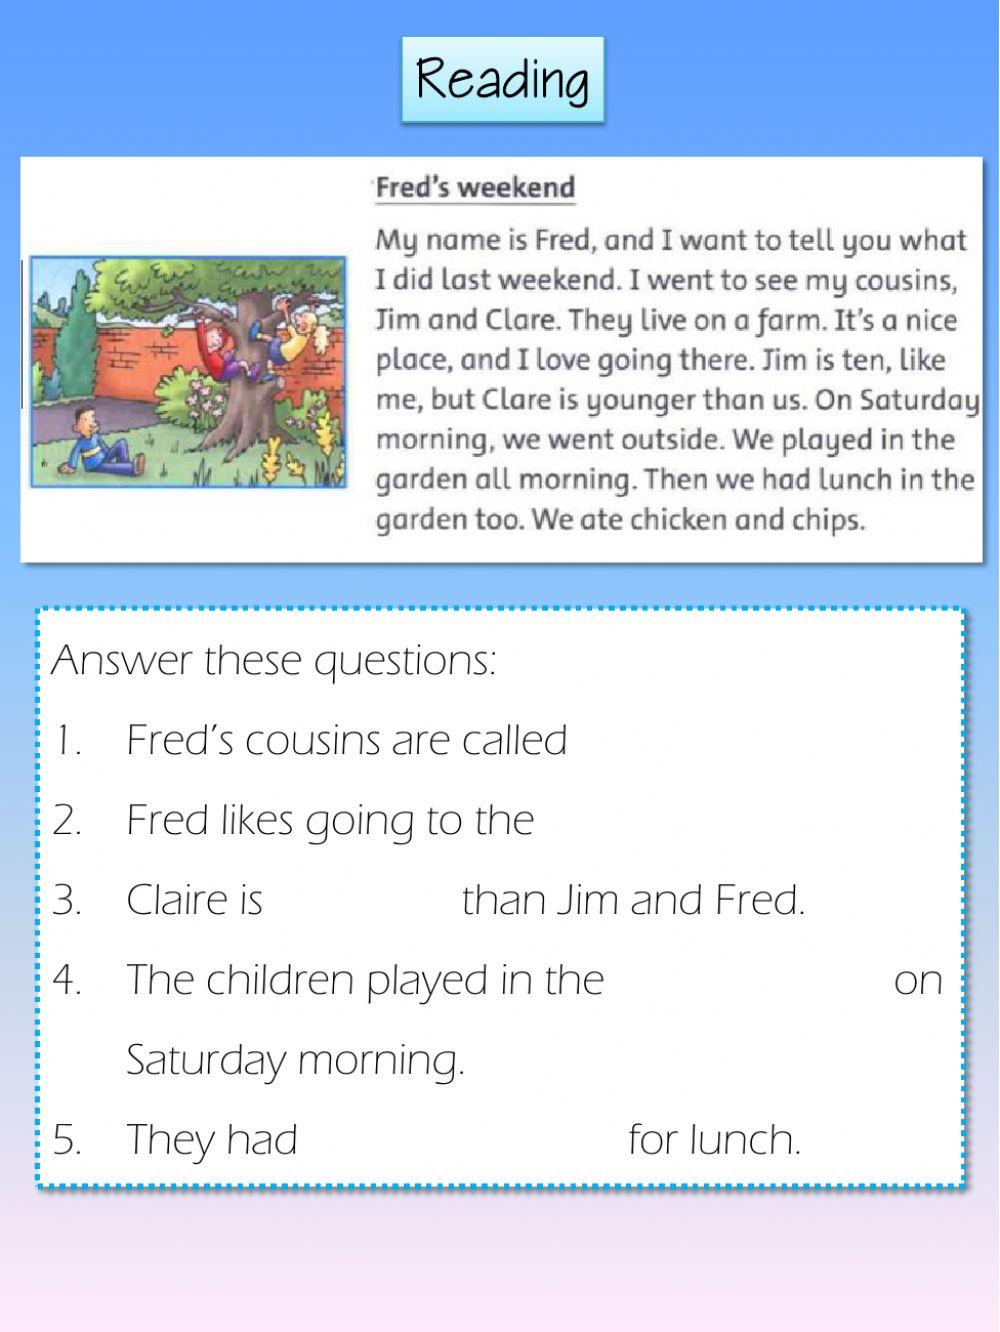 Reading Fred's weekend